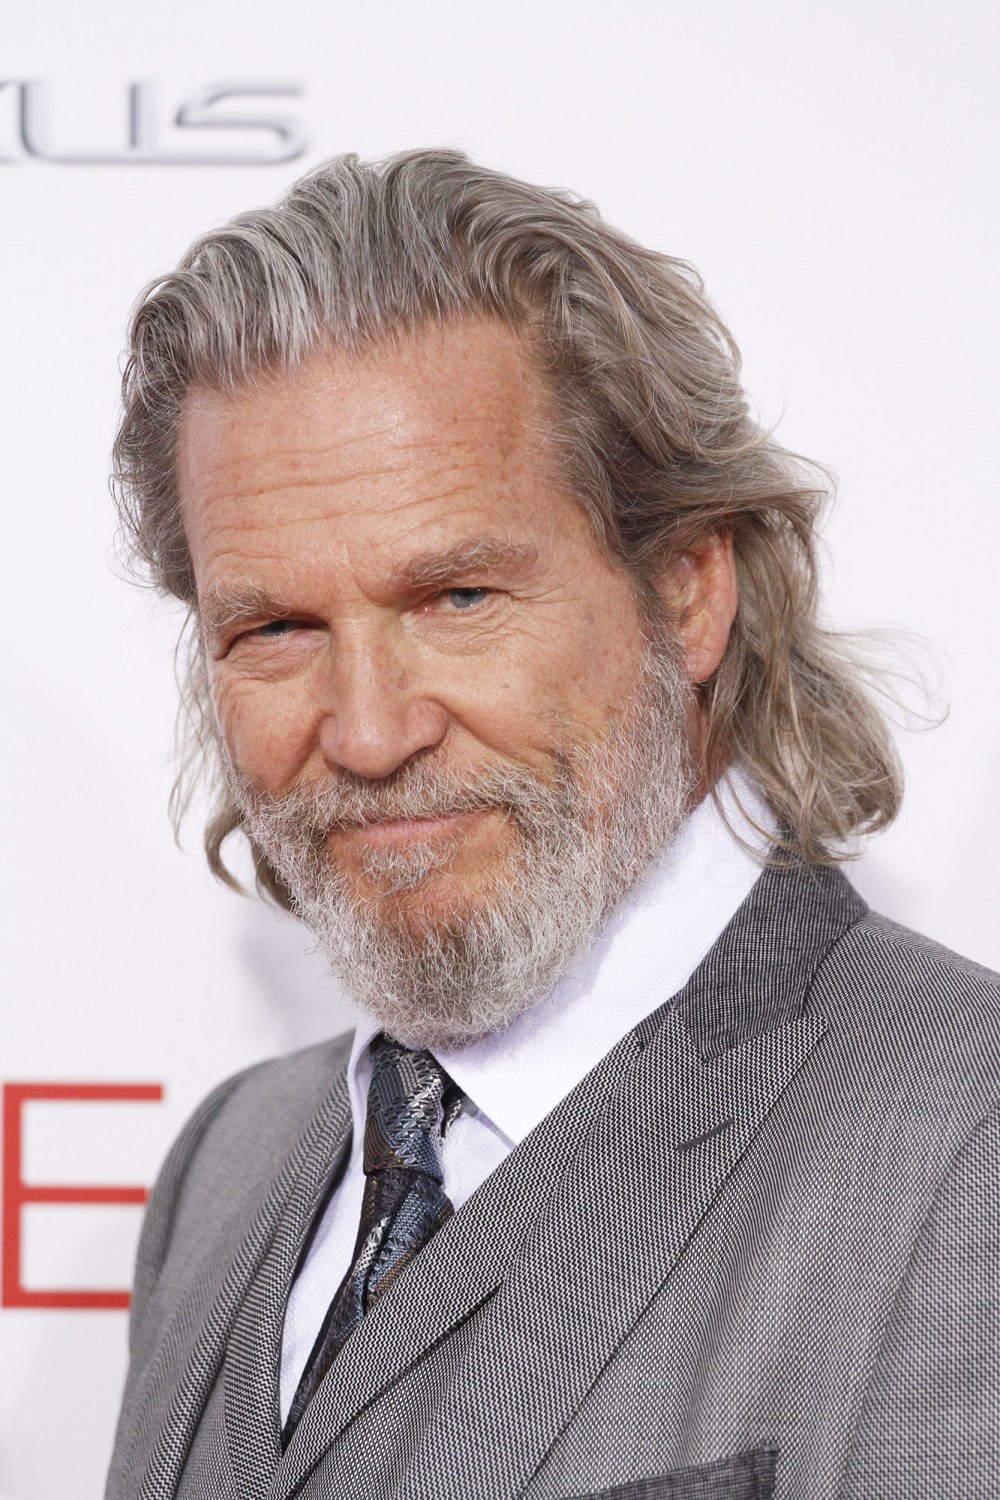 Jeff Bridges Throws First Pitch at Dodgers Game Big Lebowski-Style: Watch the Video!